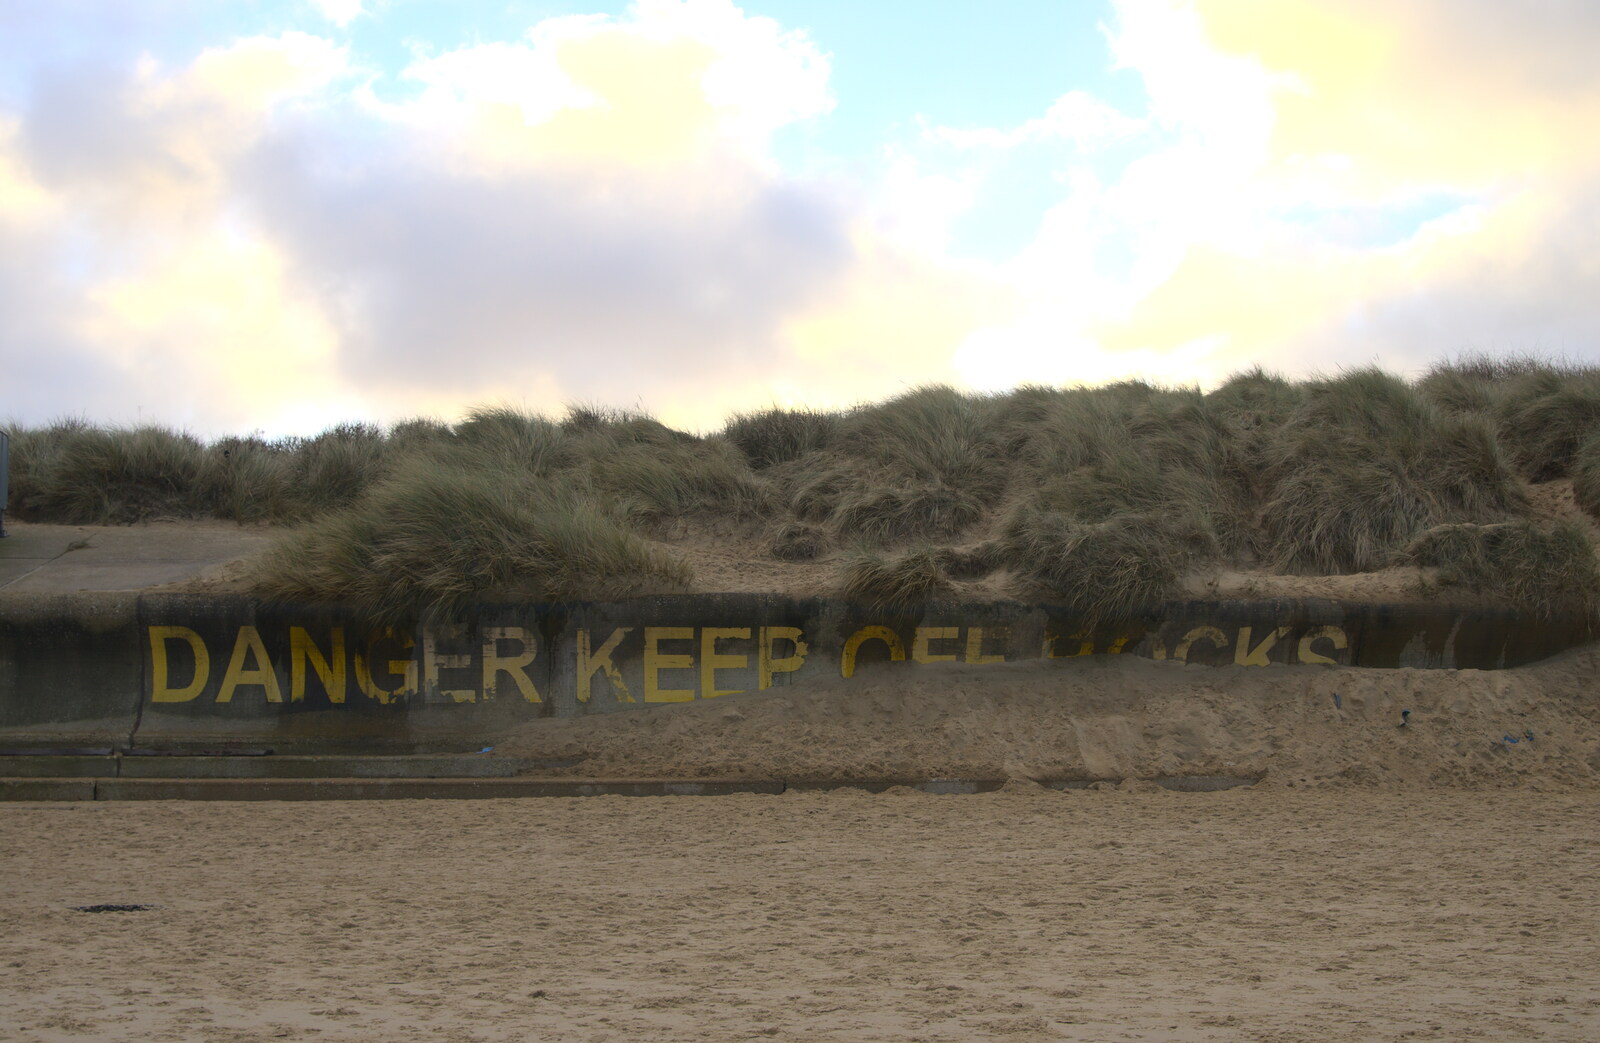 A danger sign is consumed by sand from Horsey Seals and Sea Palling, Norfolk Coast - 2nd January 2017